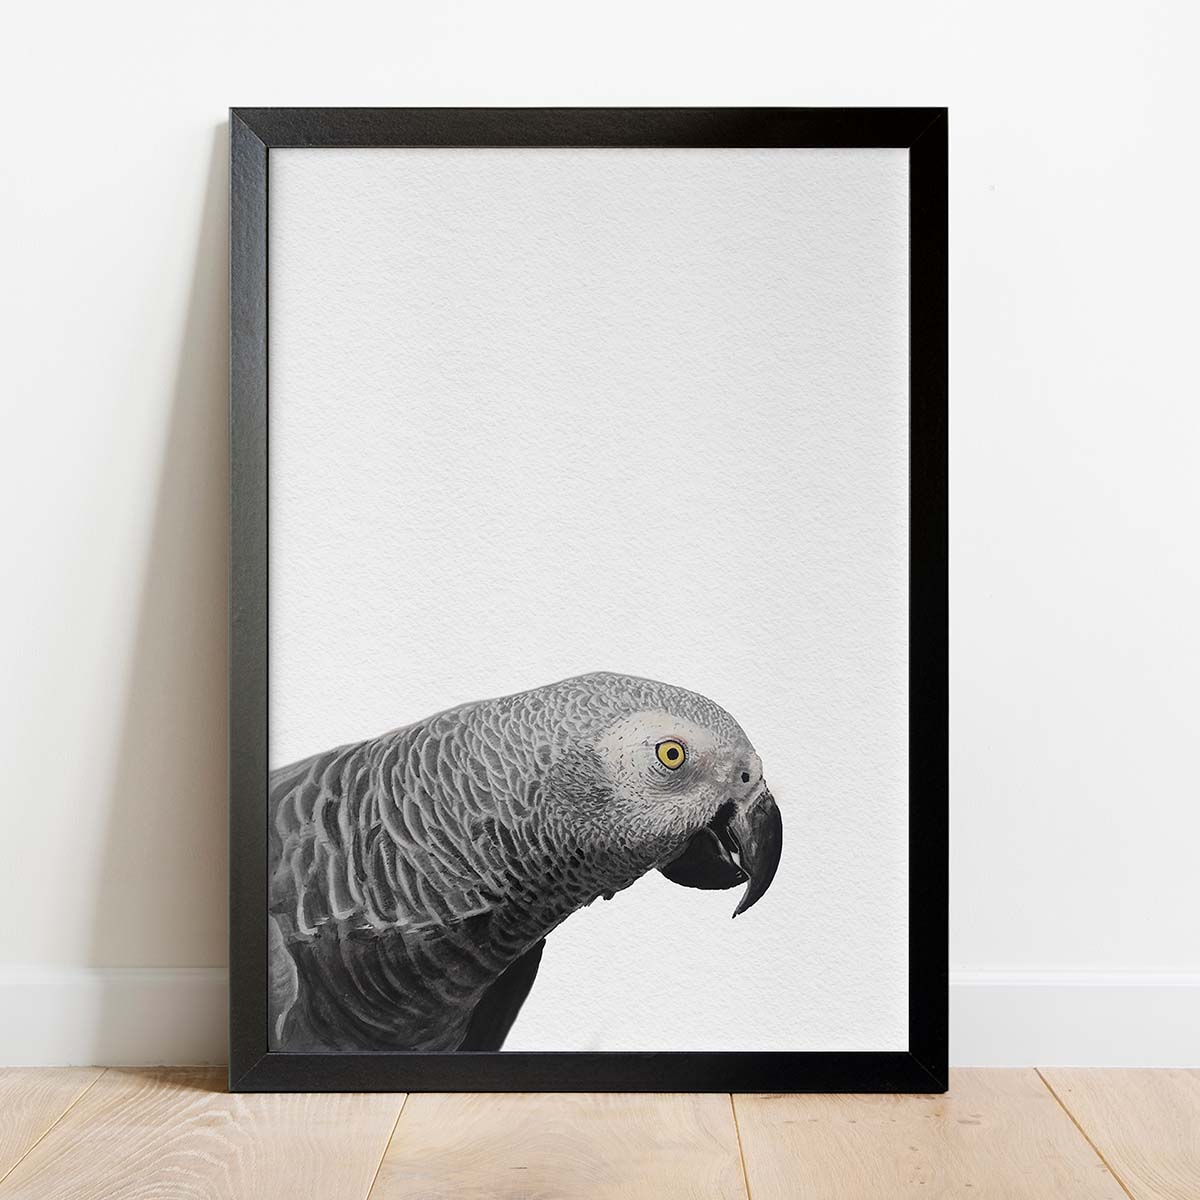 Custom Parrot Portrait From Photo 100% Watercolor Hand Painting Peekaboo